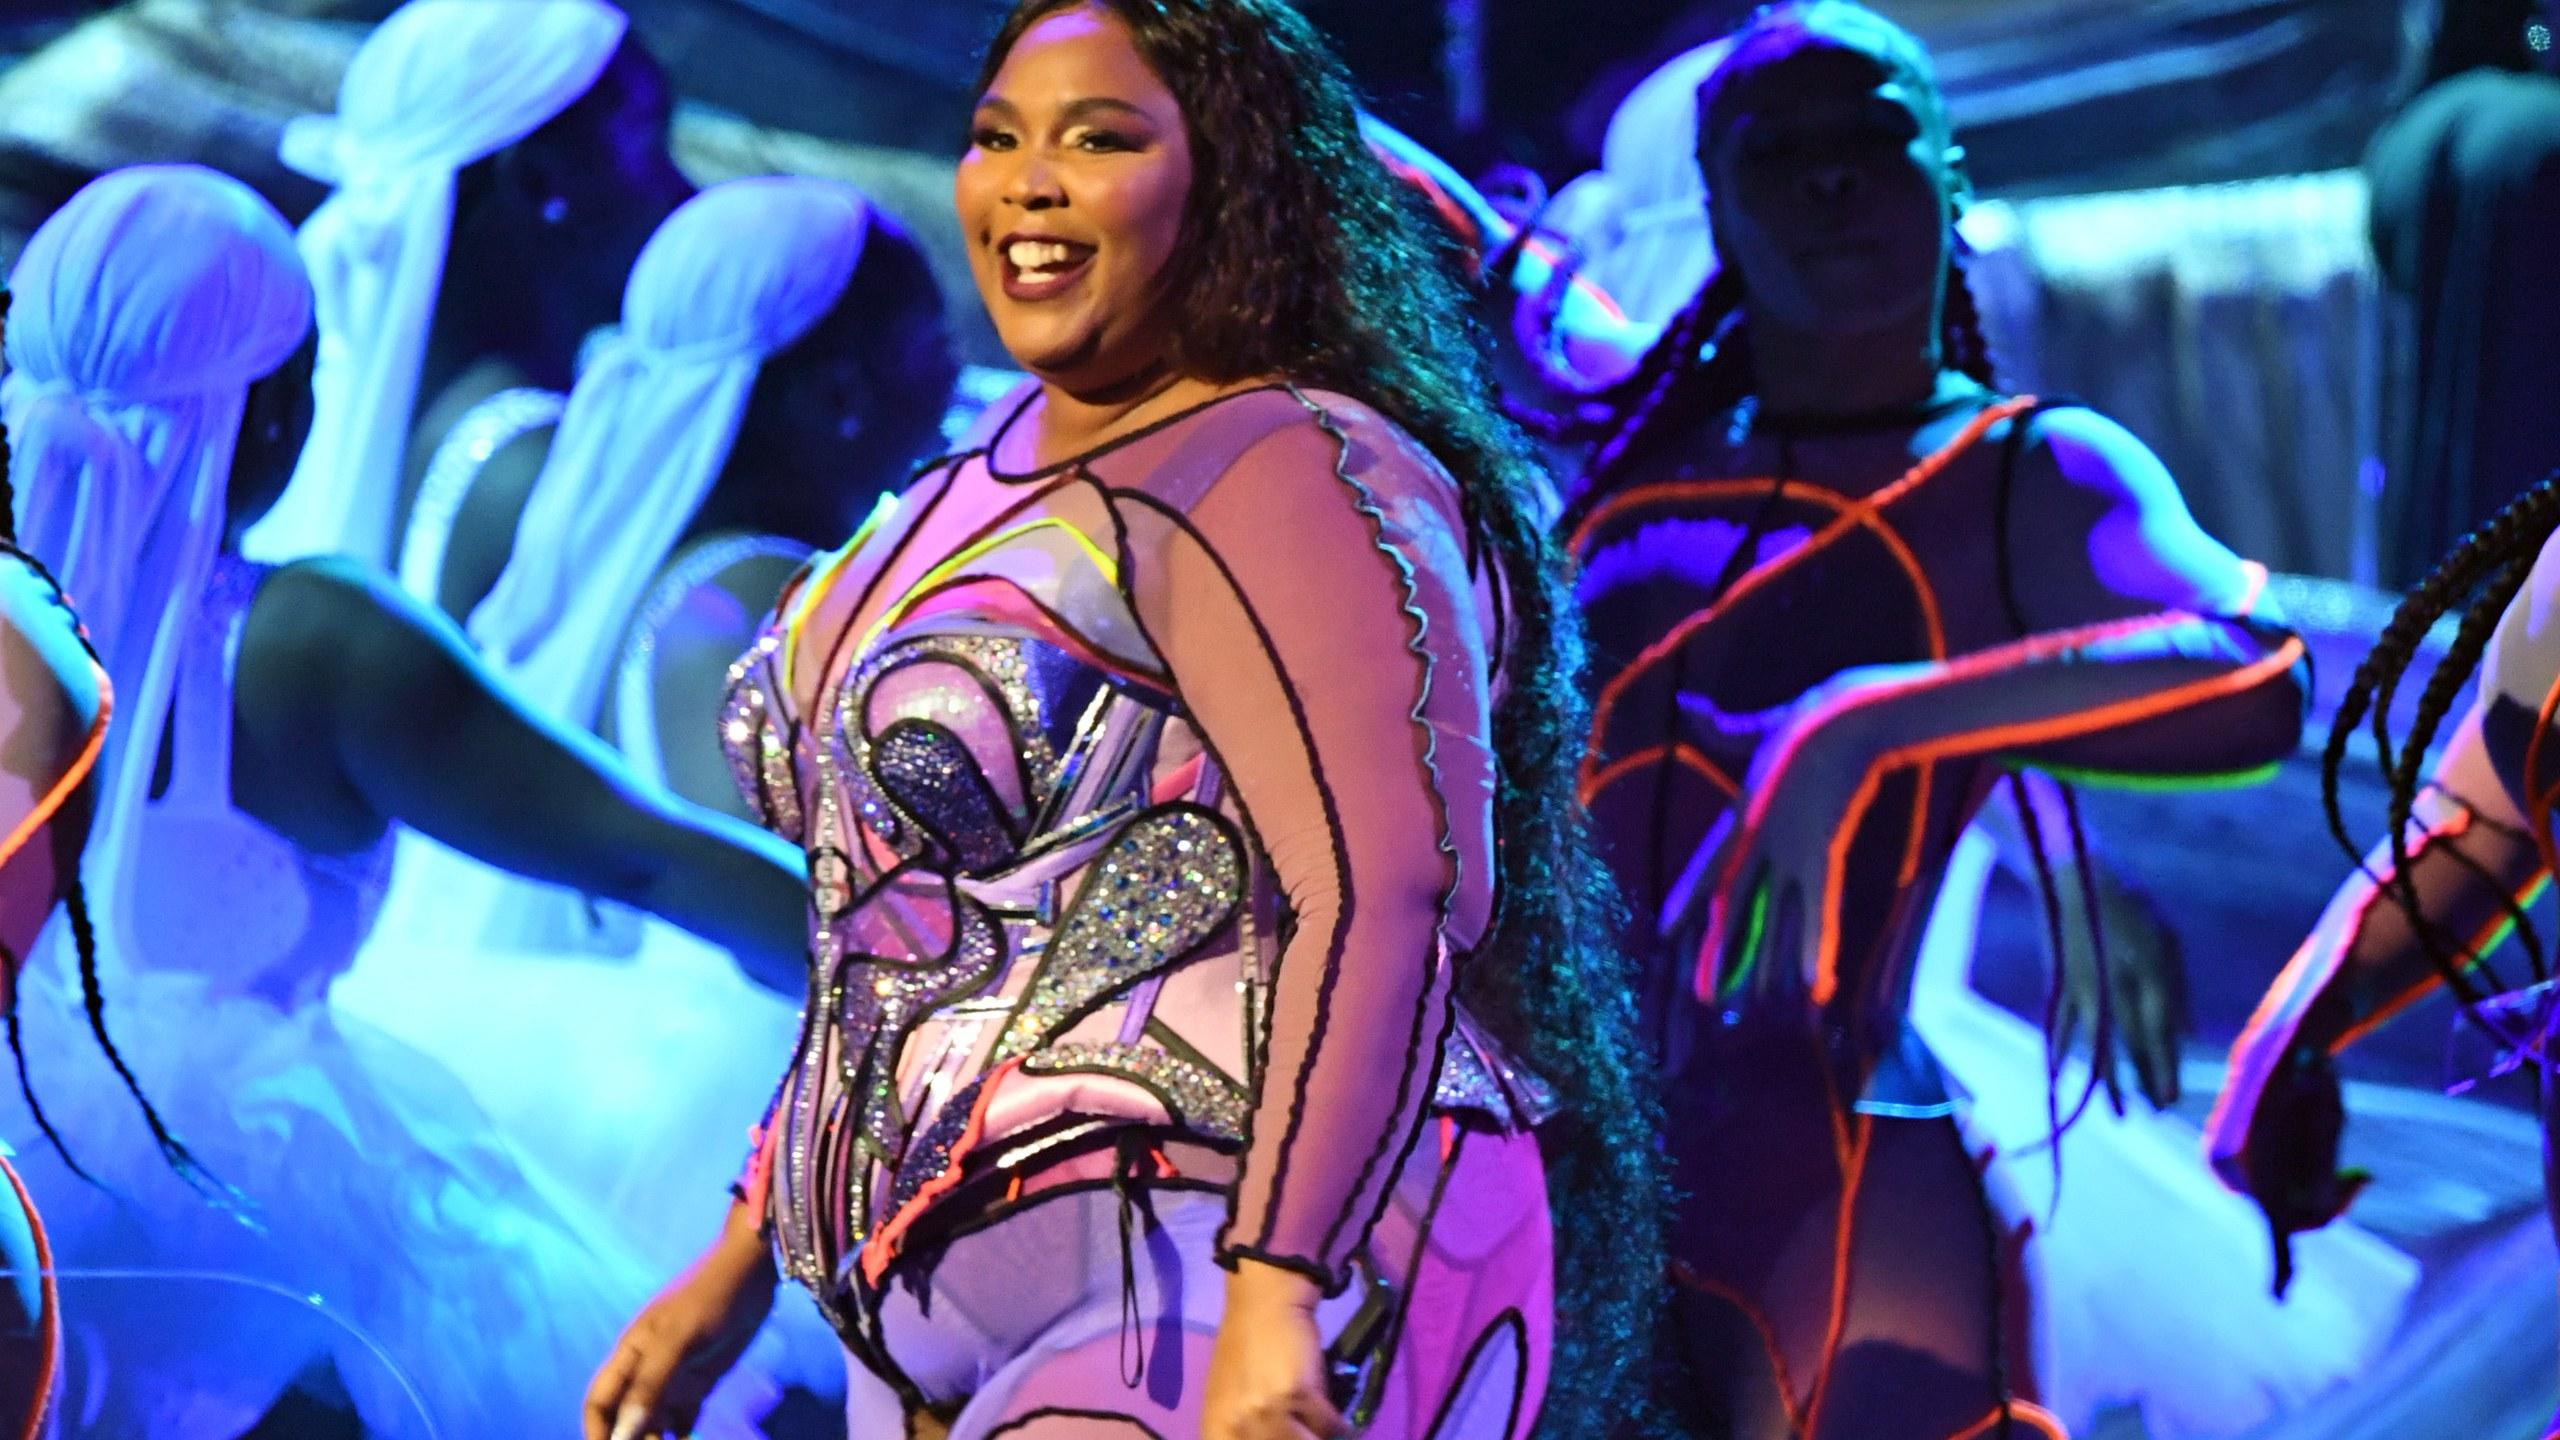 Lizzo's Performance at the Grammys 2020 Is All You Need to